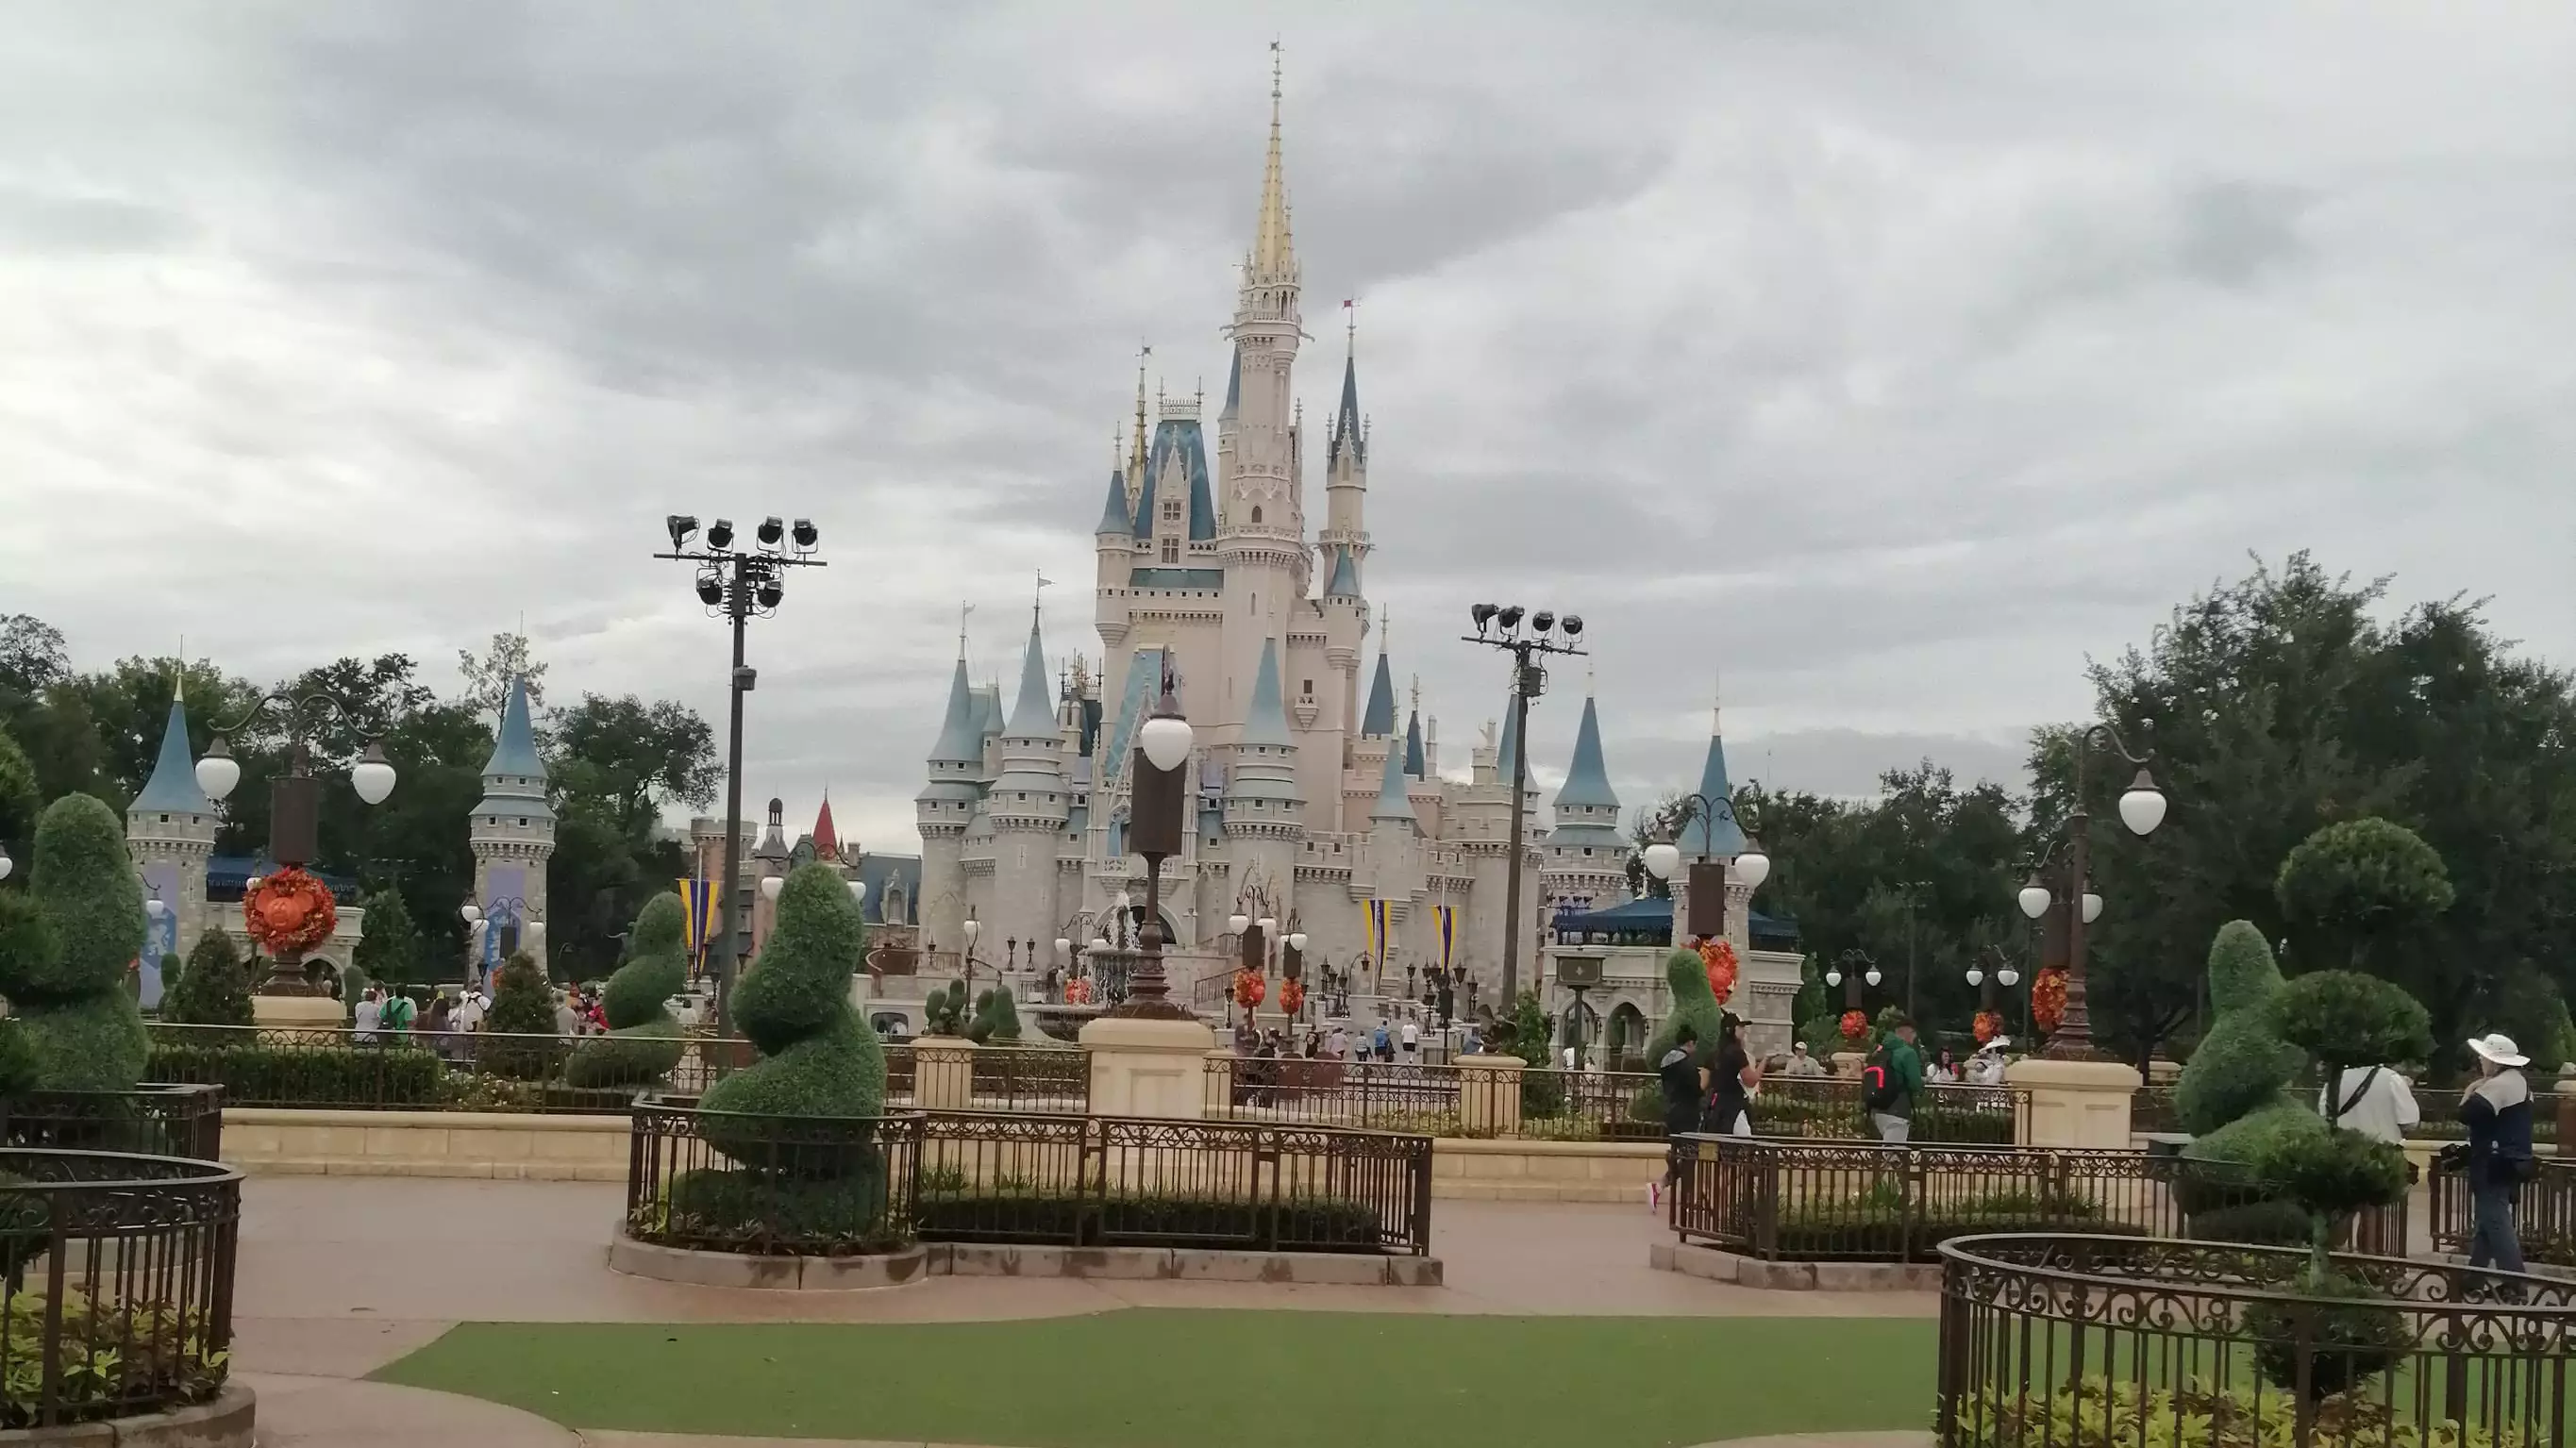 Eerie Photos Show An Almost-Deserted Disney World After It Reopens Following Hurricane Dorian